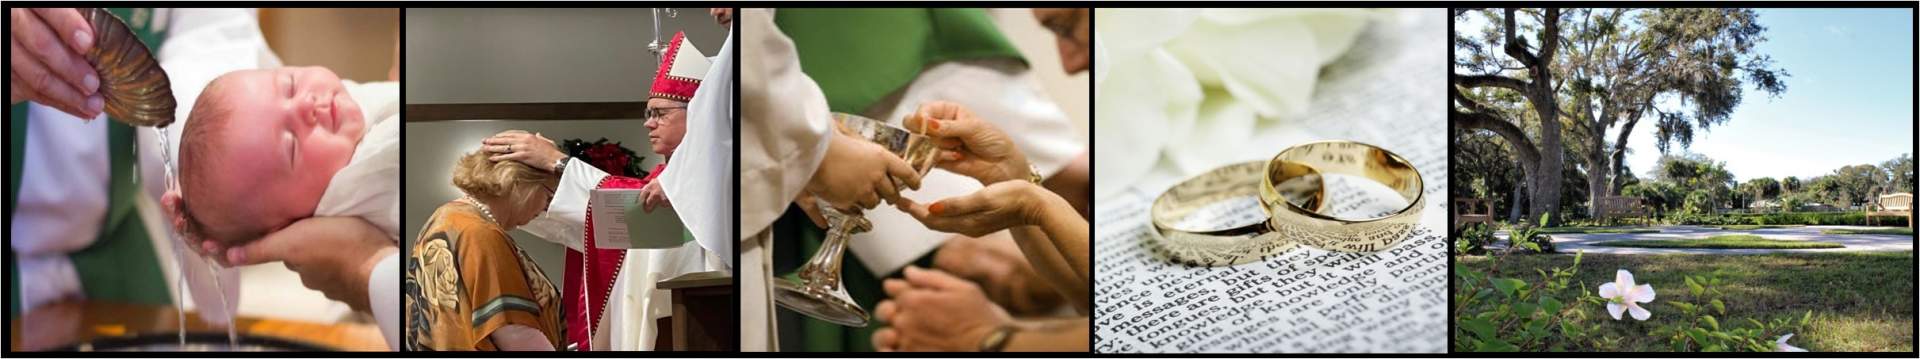 A collage of five images: a baby being Baptized, a bishop administering Confirmation, people receiving Holy Communion, wedding rings on a bible, and a park scene symbolizing a funeral with trees.